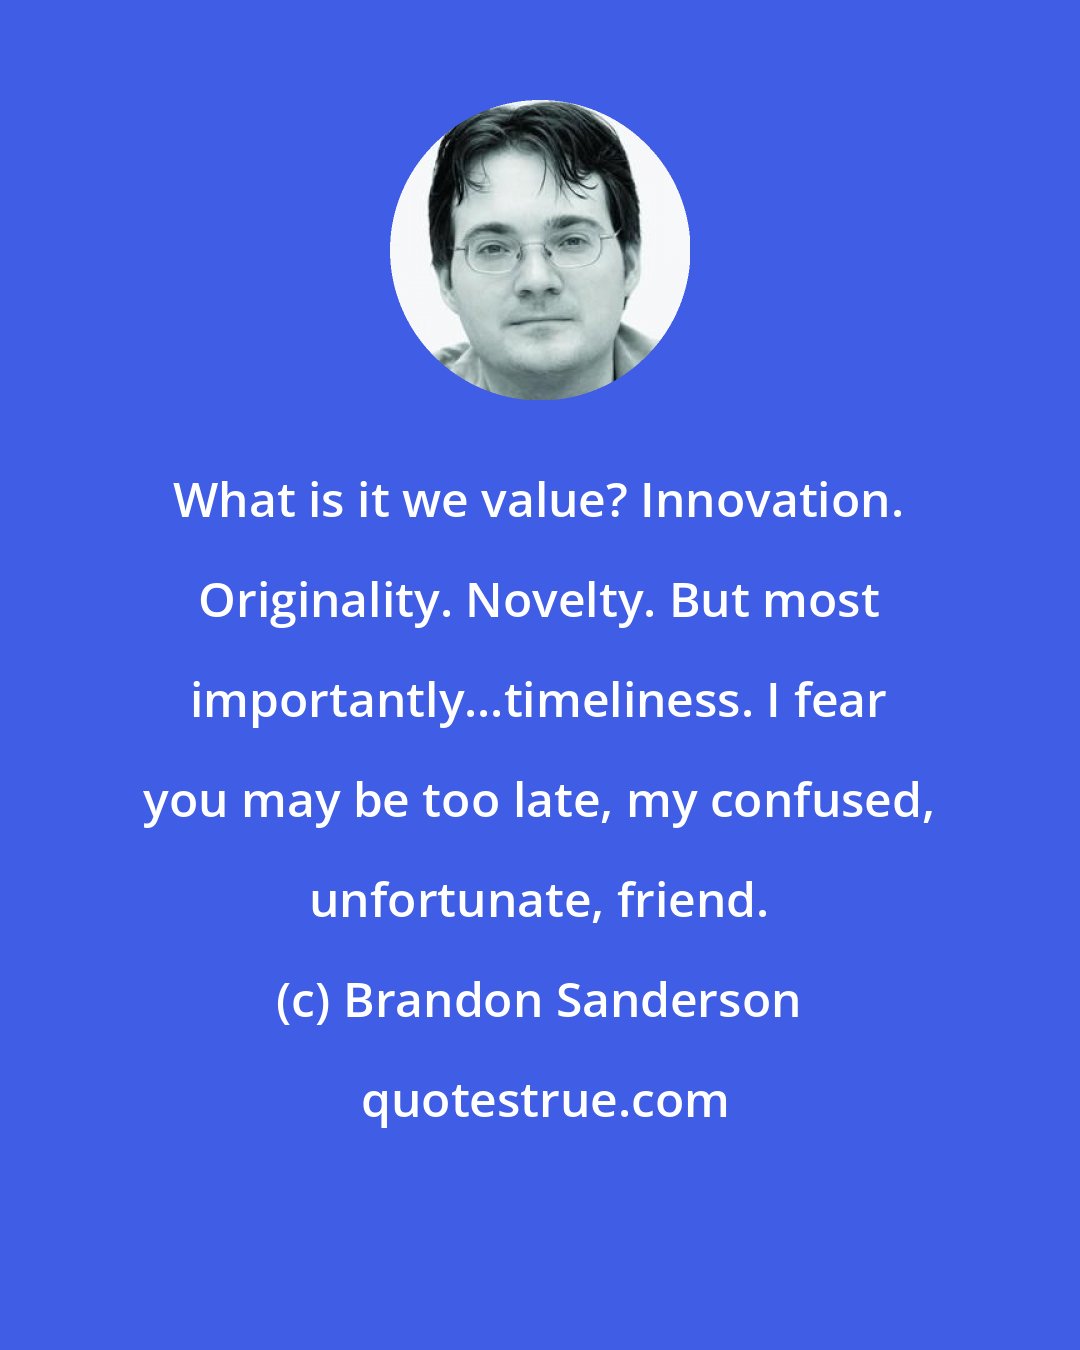 Brandon Sanderson: What is it we value? Innovation. Originality. Novelty. But most importantly...timeliness. I fear you may be too late, my confused, unfortunate, friend.